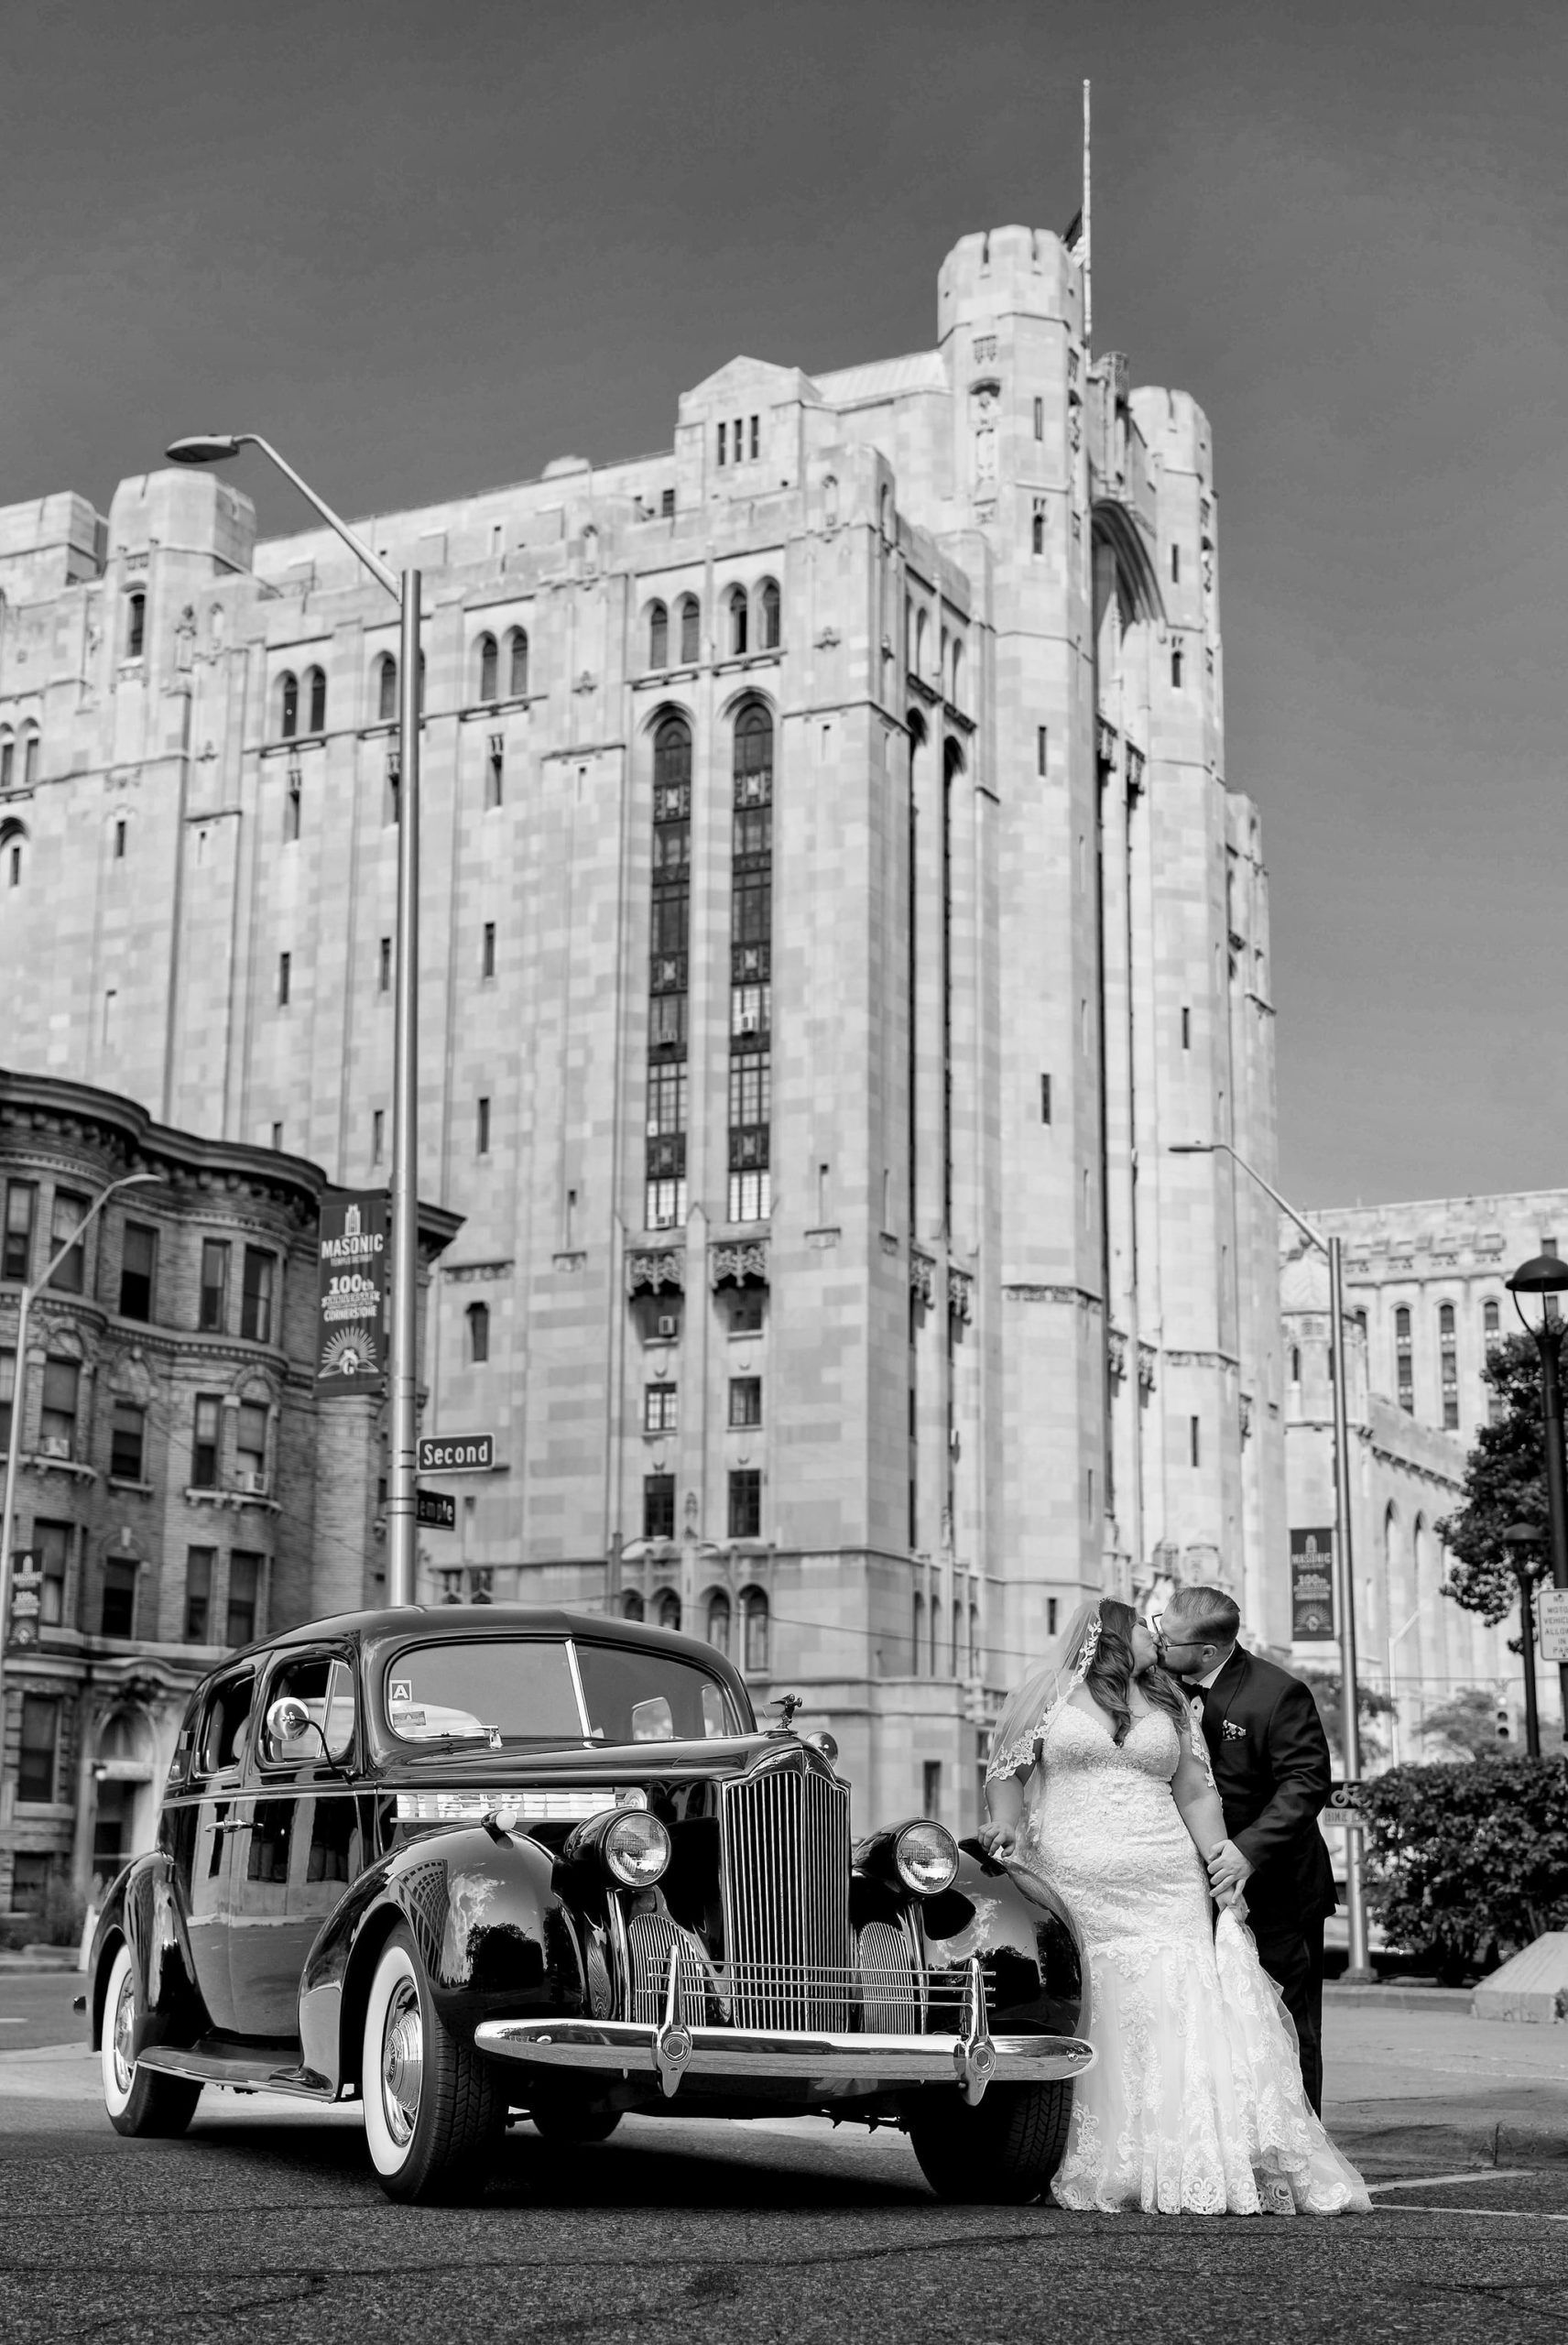 A couple poses with a classic car on the streets of Detroit near the Masonic Temple.